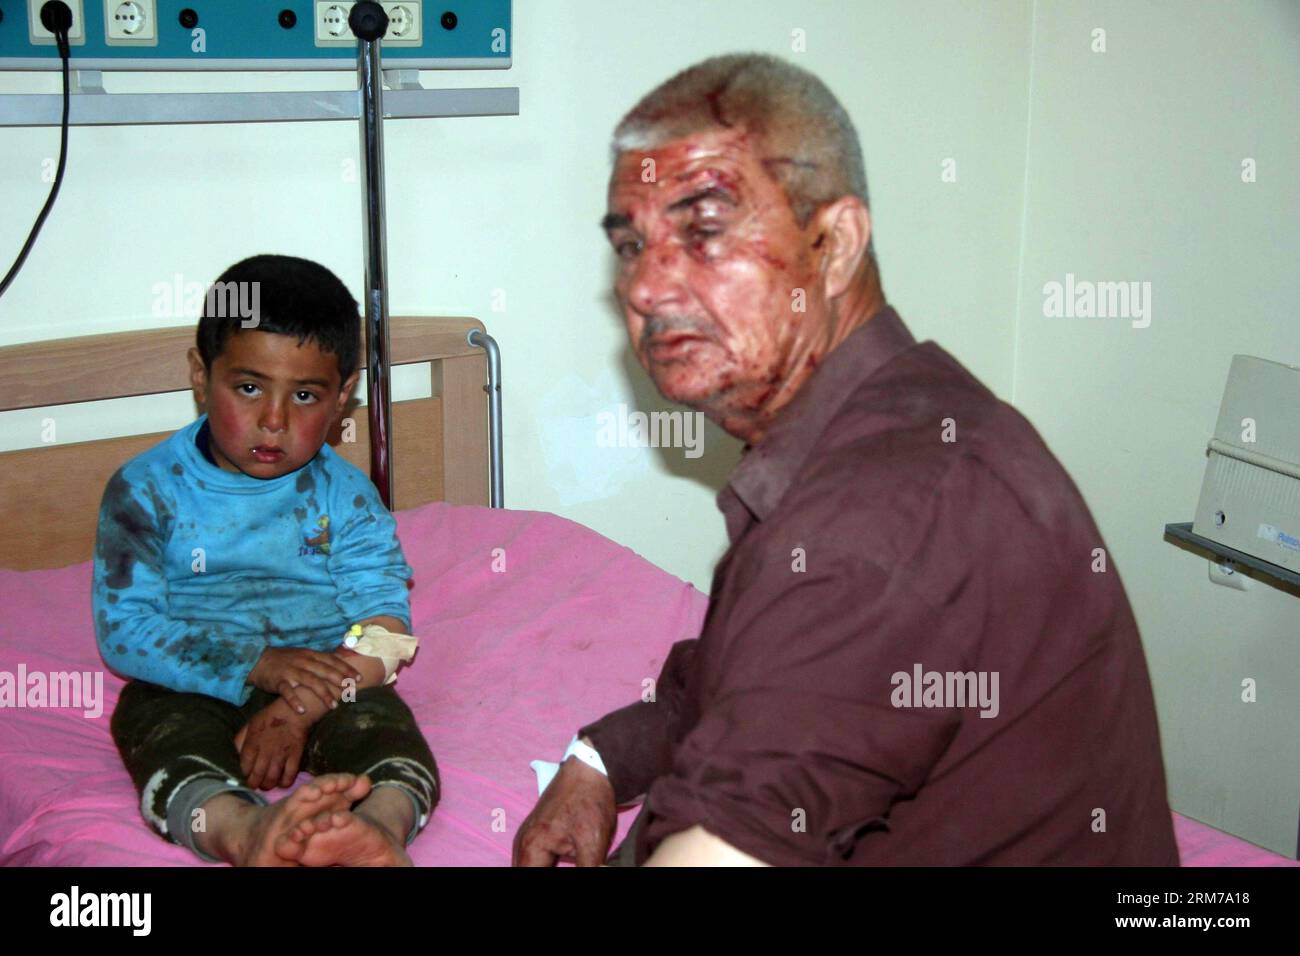 (140220) -- KILIS(TURKEY), Feb. 20, 2014 (Xinhua) -- Wounded people wait for medical treatment at a hospital in southern Turkish province of Kilis, Feb. 20, 2014. At least 24 people were killed and many others wounded on Thursday in a strong explosion near Syrian- Turkish border in Kilis province in southern Turkey, private Dogan news agency reported. (Xinhua/Mert Macit) TURKEY-KILIS-SYRIAN BORDER-BLAST PUBLICATIONxNOTxINxCHN   Turkey Feb 20 2014 XINHUA Wounded Celebrities Wait for Medical Treatment AT a Hospital in Southern Turkish Province of  Feb 20 2014 AT least 24 Celebrities Were KILLED Stock Photo